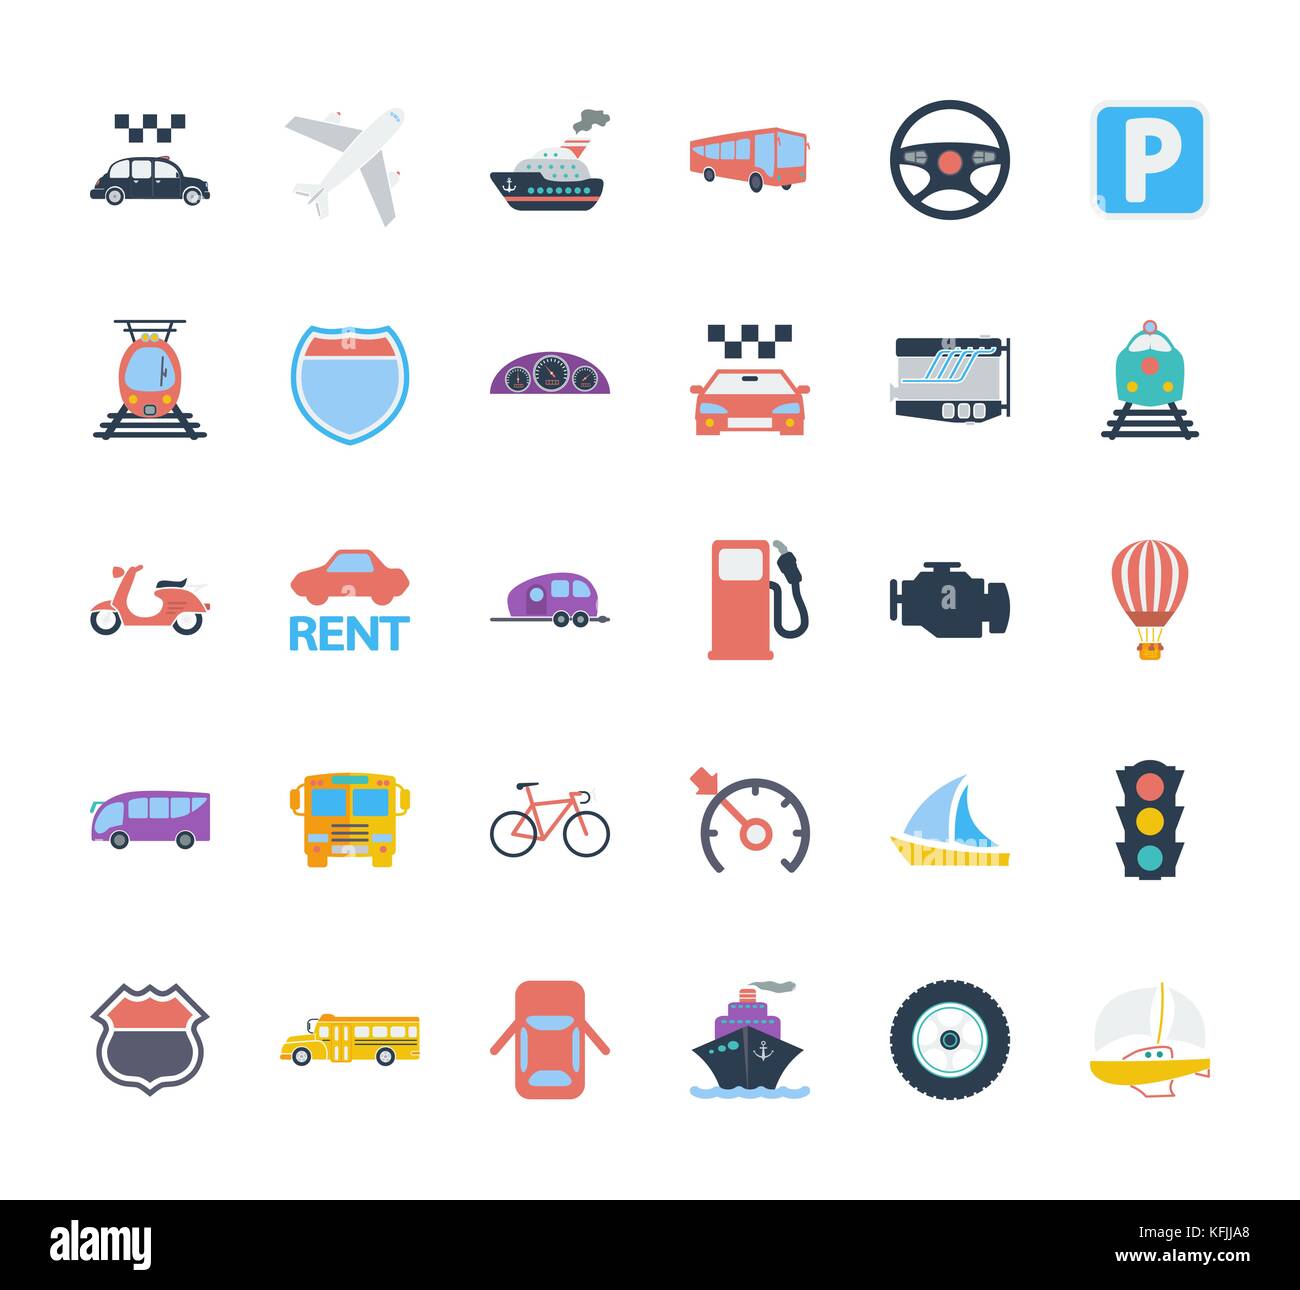 Transportation icons set. Flat vector related icons set for web and mobile applications. It can be used as - logo, pictogram, icon, infographic elemen Stock Vector